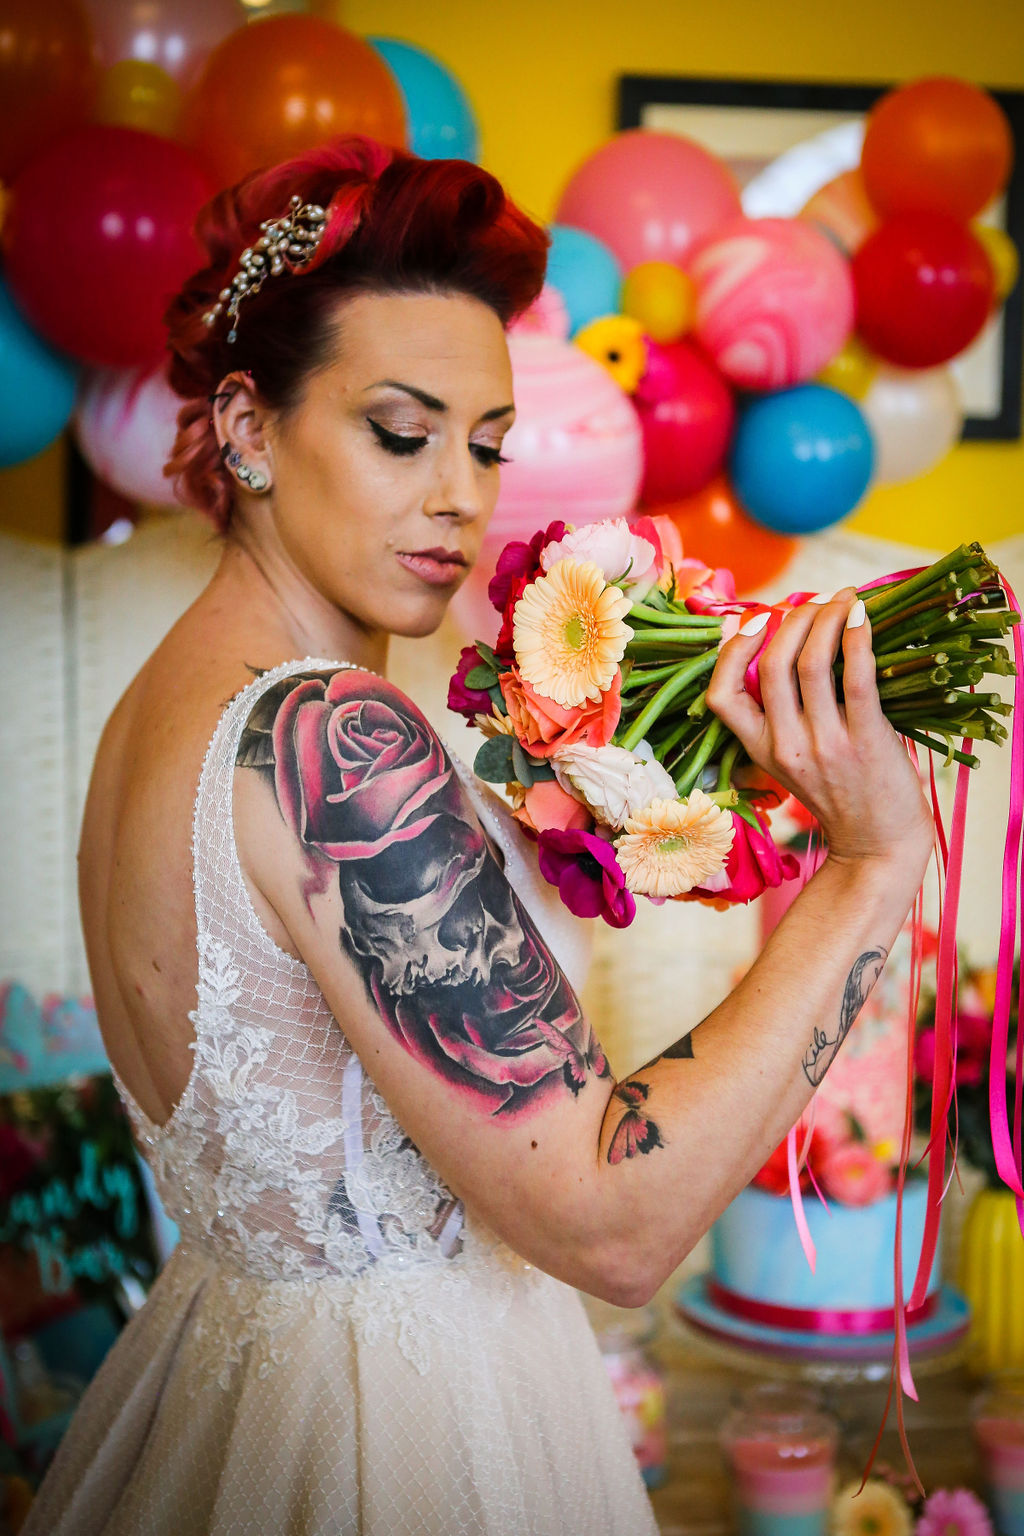 Rainbow Wedding Inspiration with Epic Balloon Trees and Hot Air Balloon